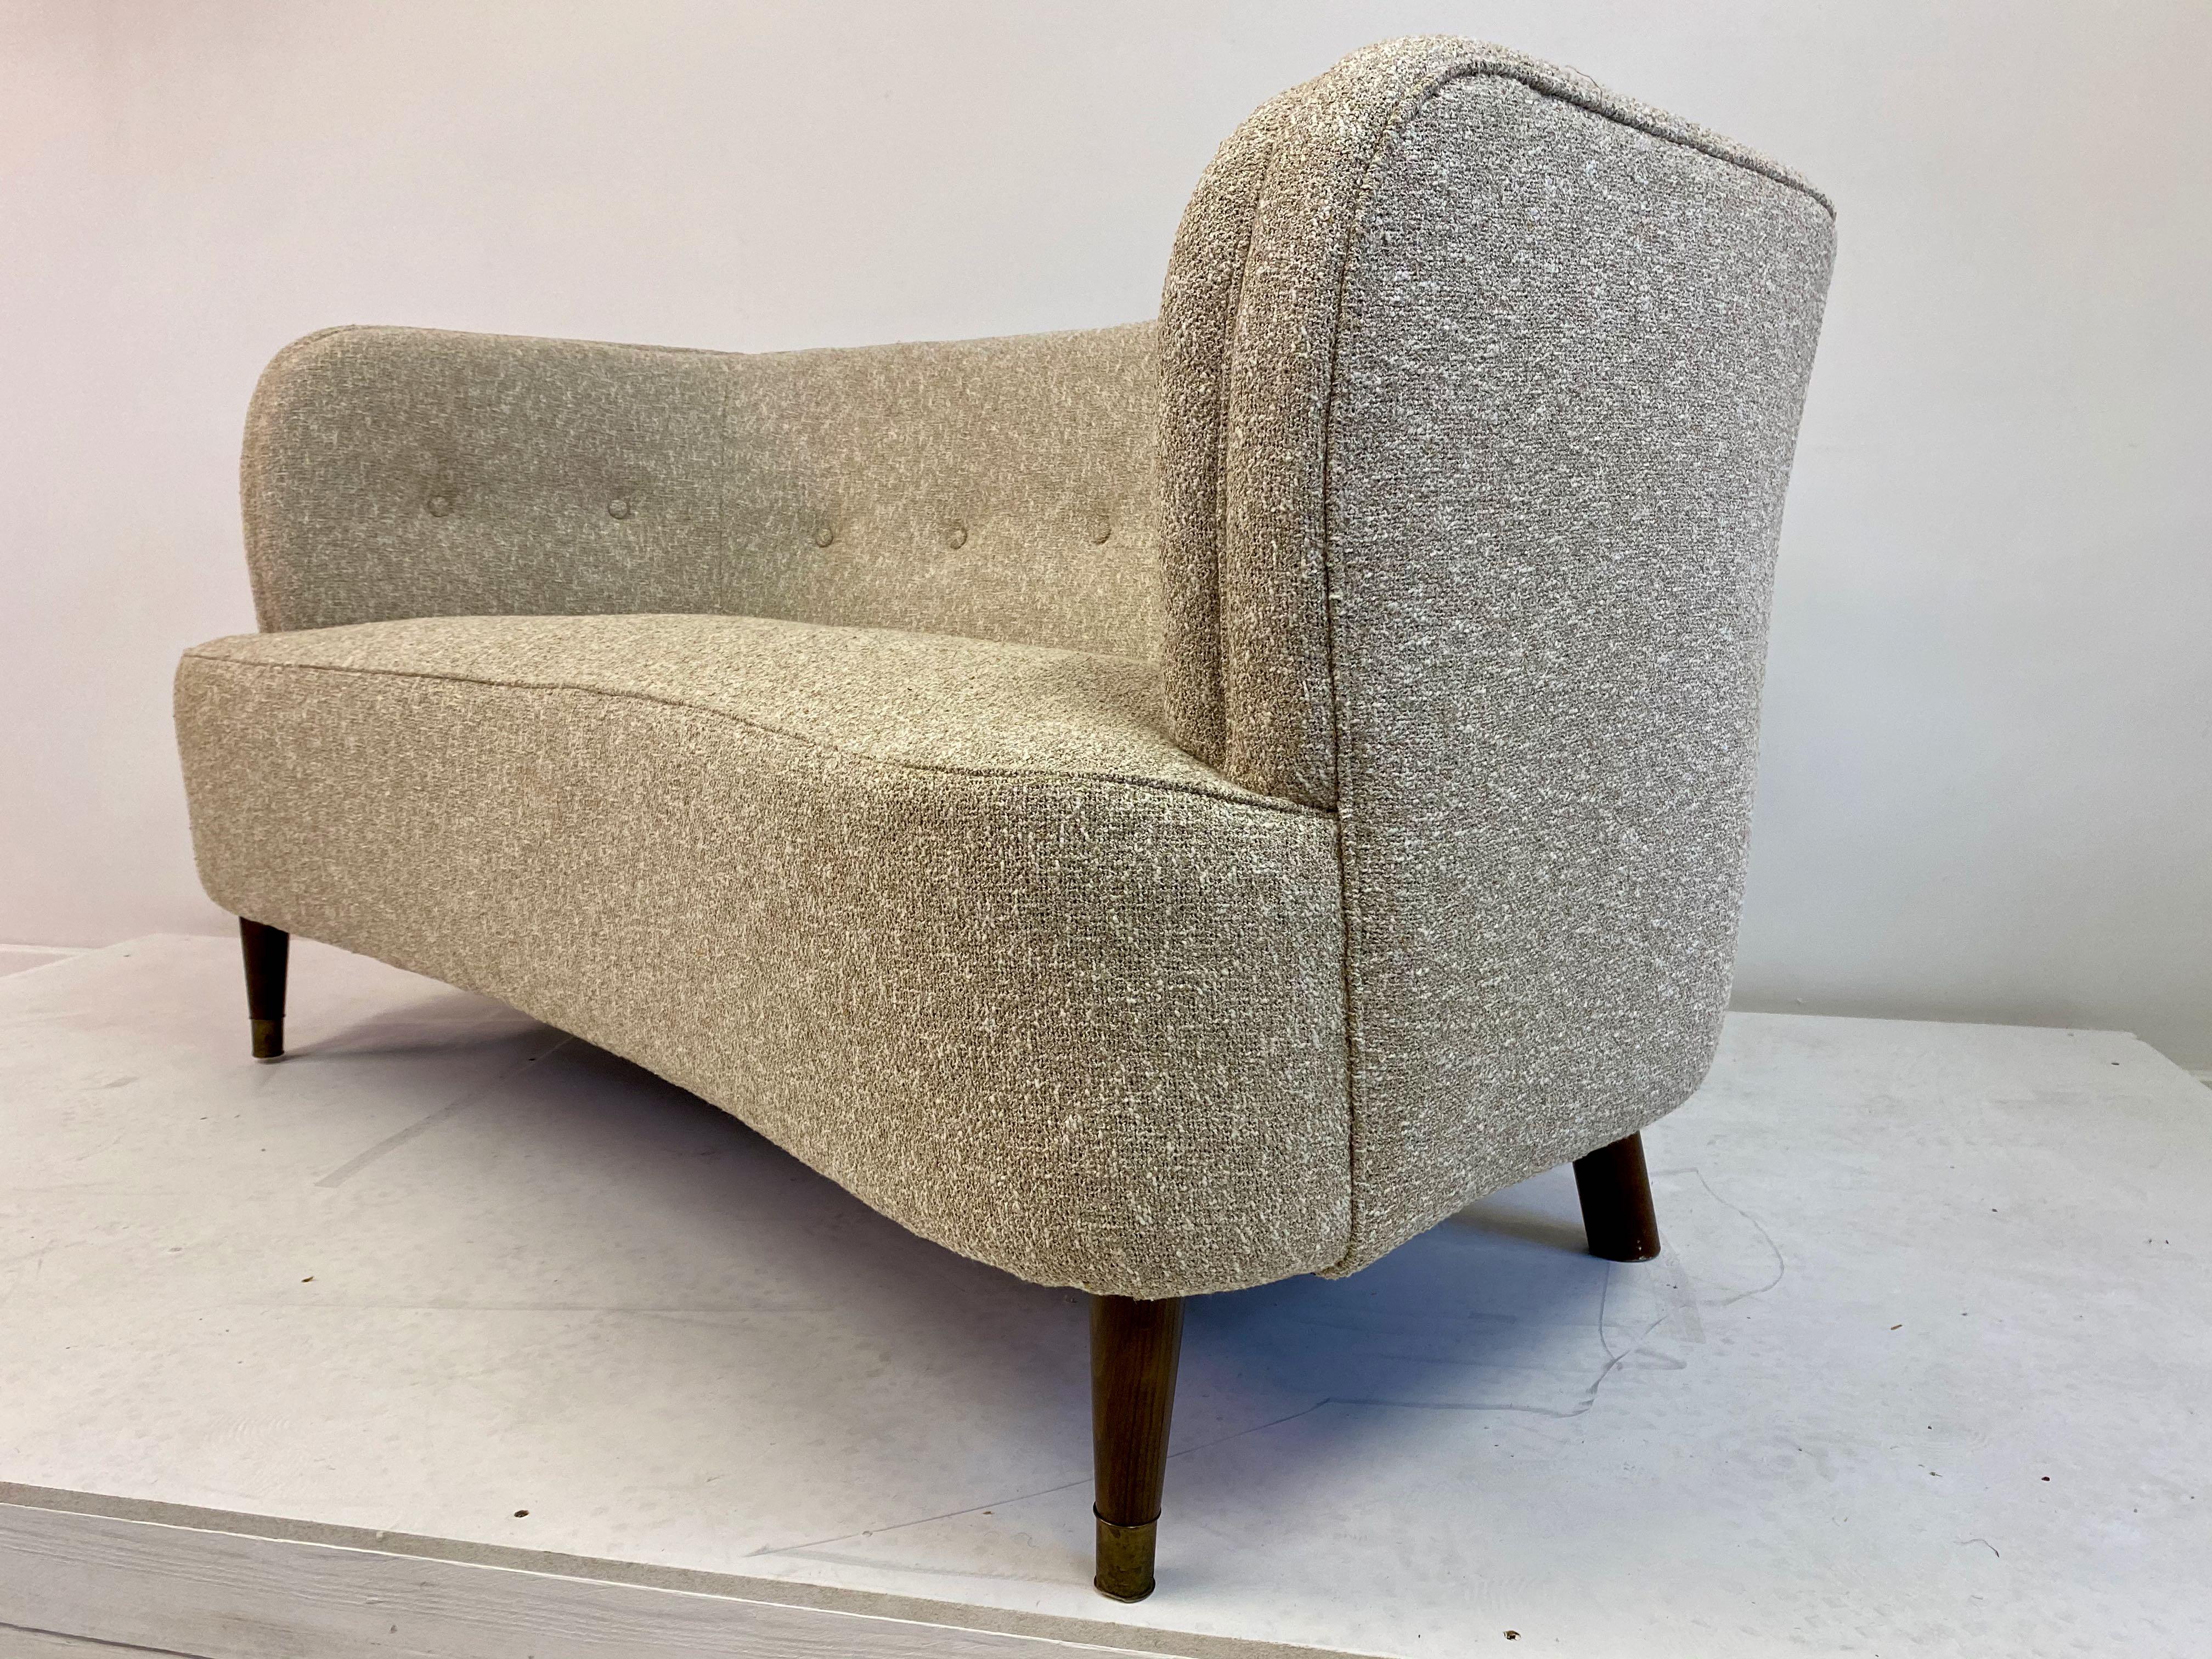 20th Century Small Curved 1940s Danish Two-Seat Sofa in Neutral Lelièvre Fabric